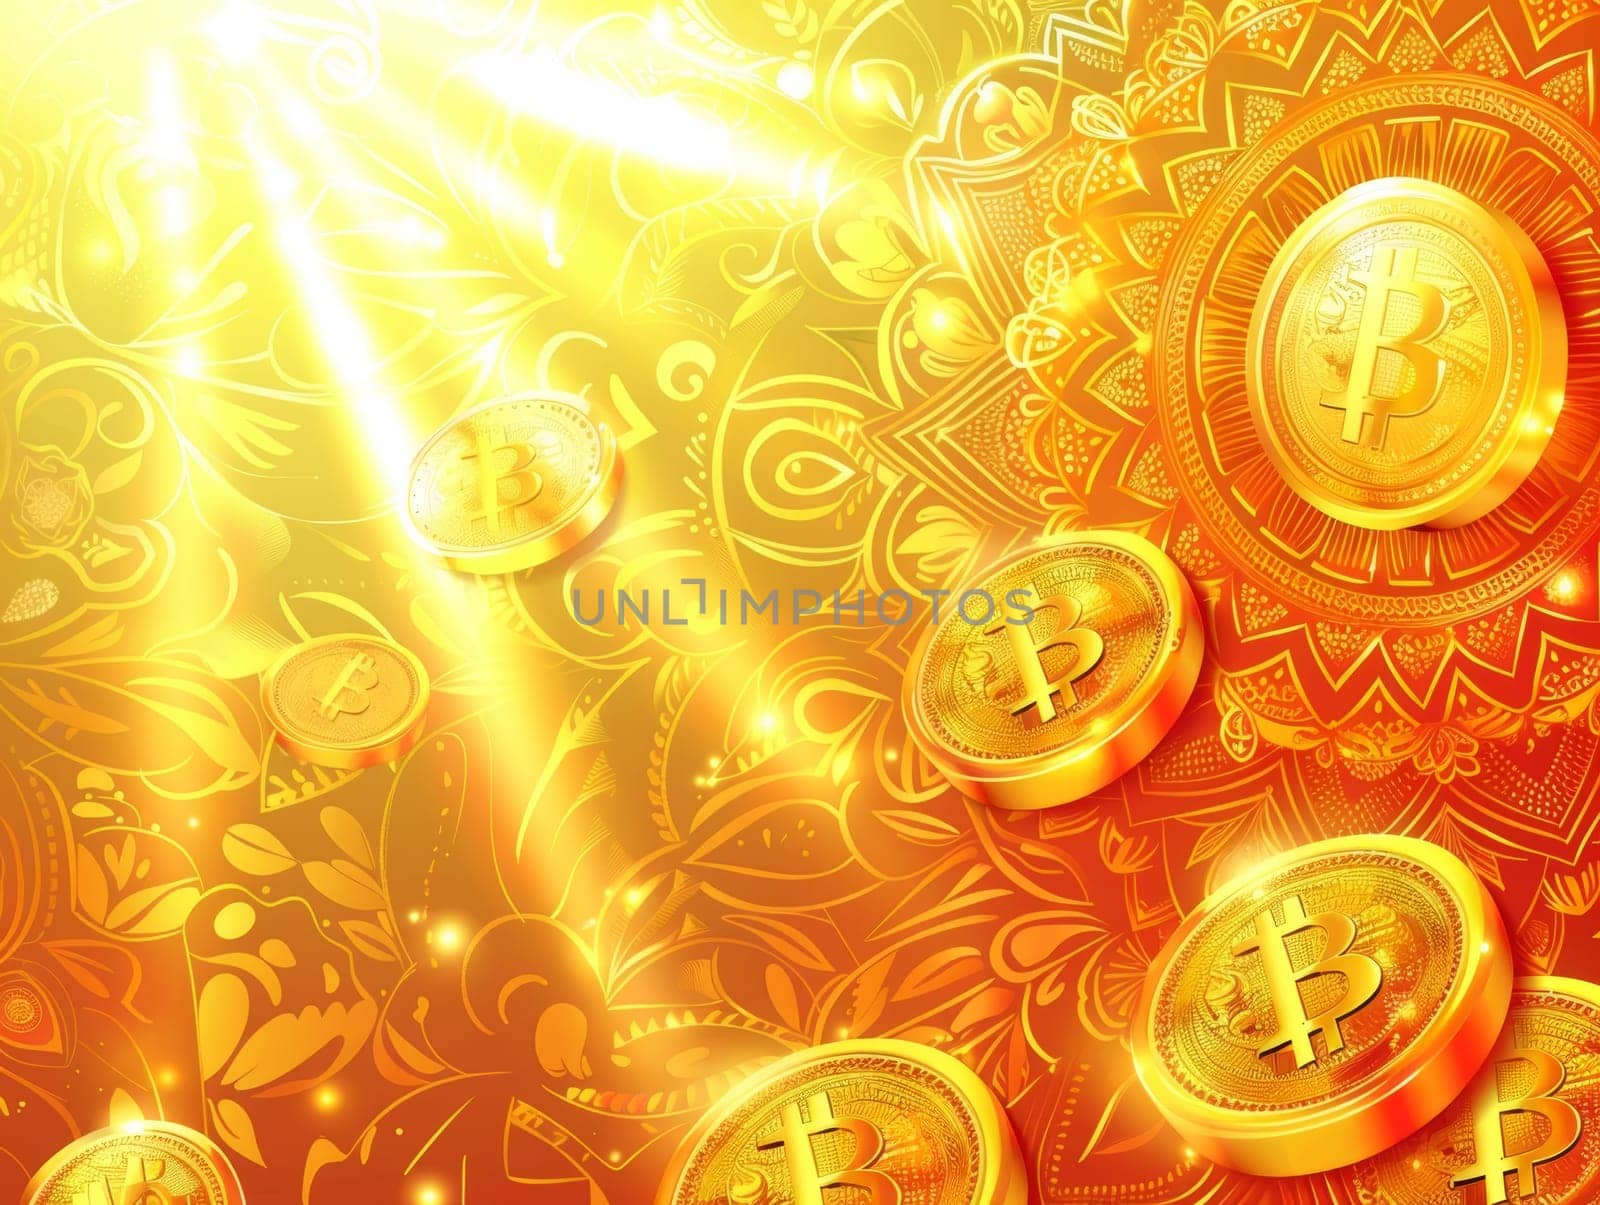 A dazzling illustration capturing the intersection of digital currency and traditional ornamental art, symbolizing wealth and innovation